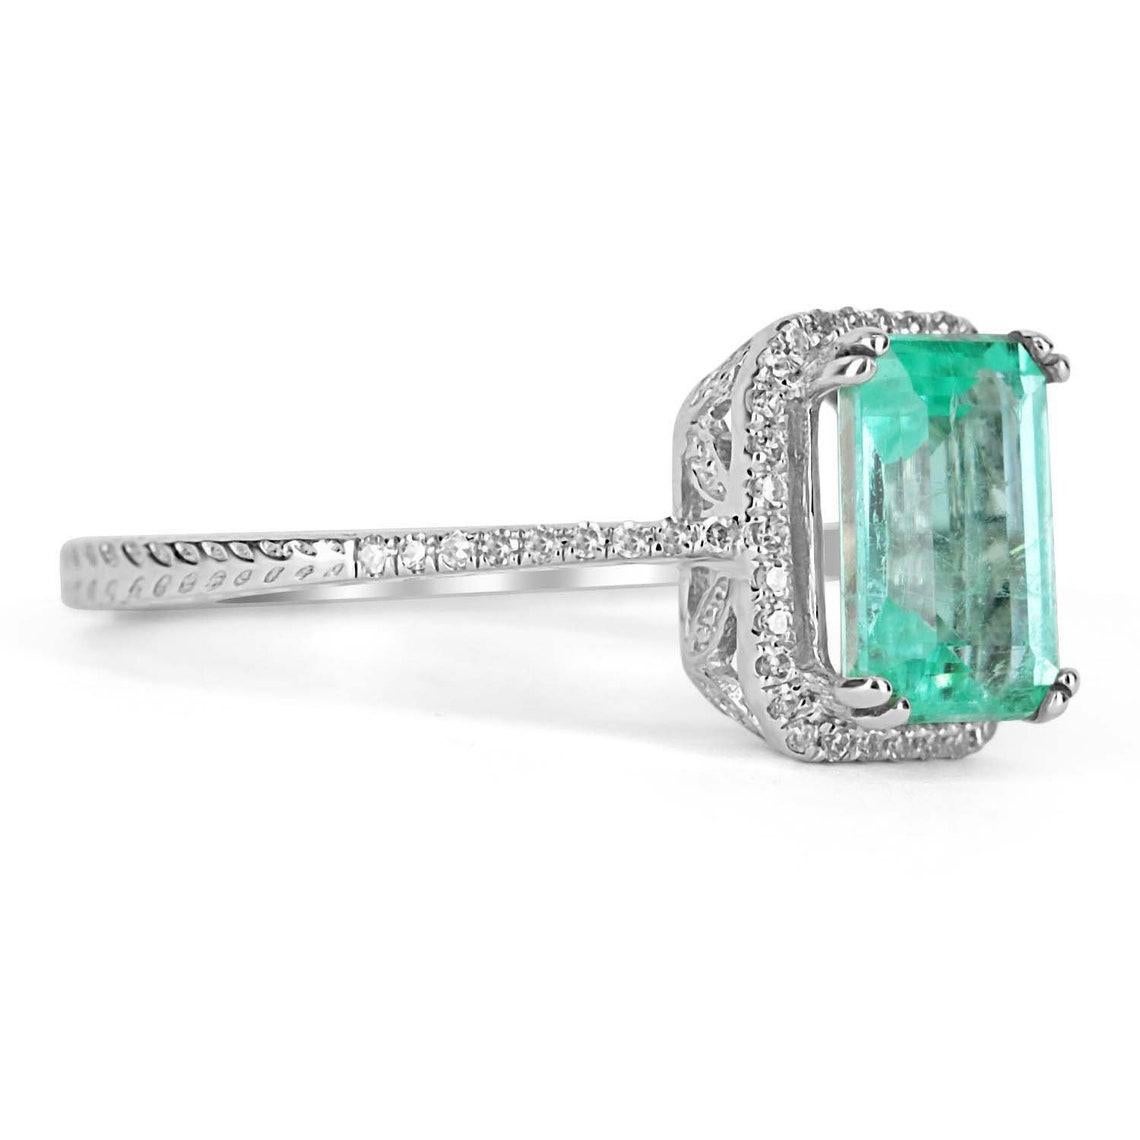 Featured is a stunning natural rare natural emerald and diamond pave halo engagement ring 14K. The center gemstone is a fine, bright blue-green, emerald skillfully handset in a 14K white gold double prong setting. This unique natural gemstone has